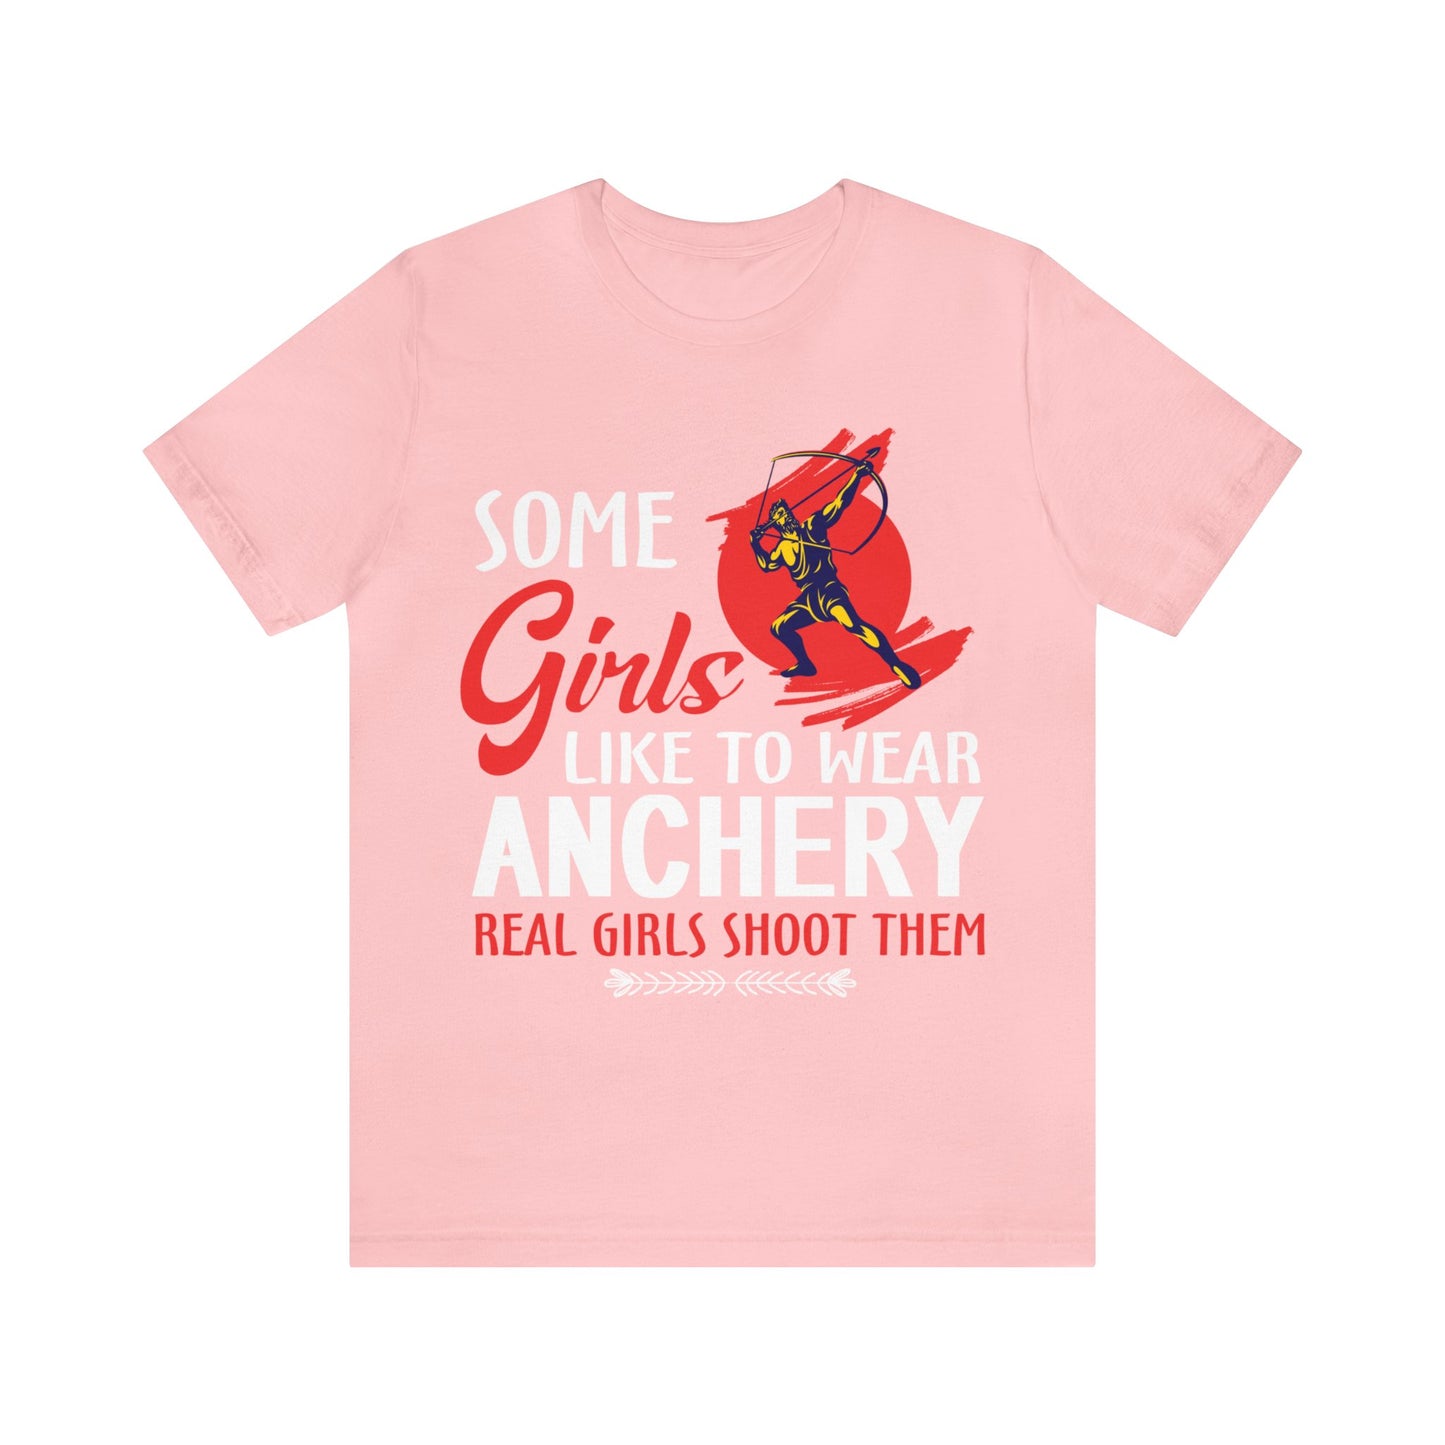 Anchery Real Girls Shoot Them T-Shirt: A Must-Have for Girls Who Embrace Adventure